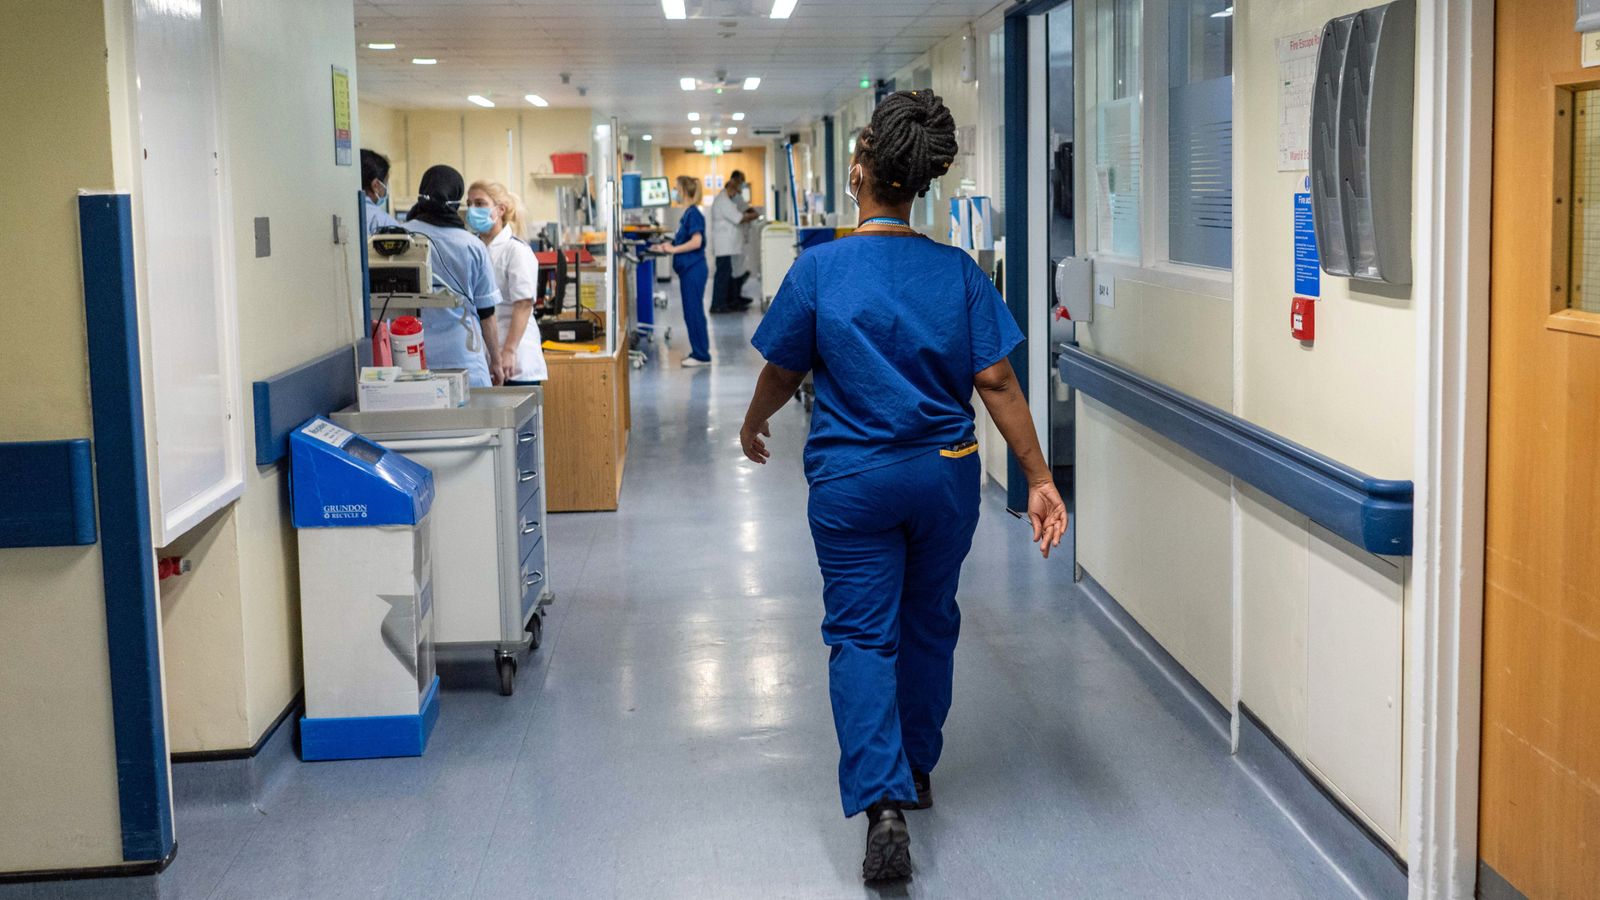 Government warned over recruitment of care workers from 'red list' countries 